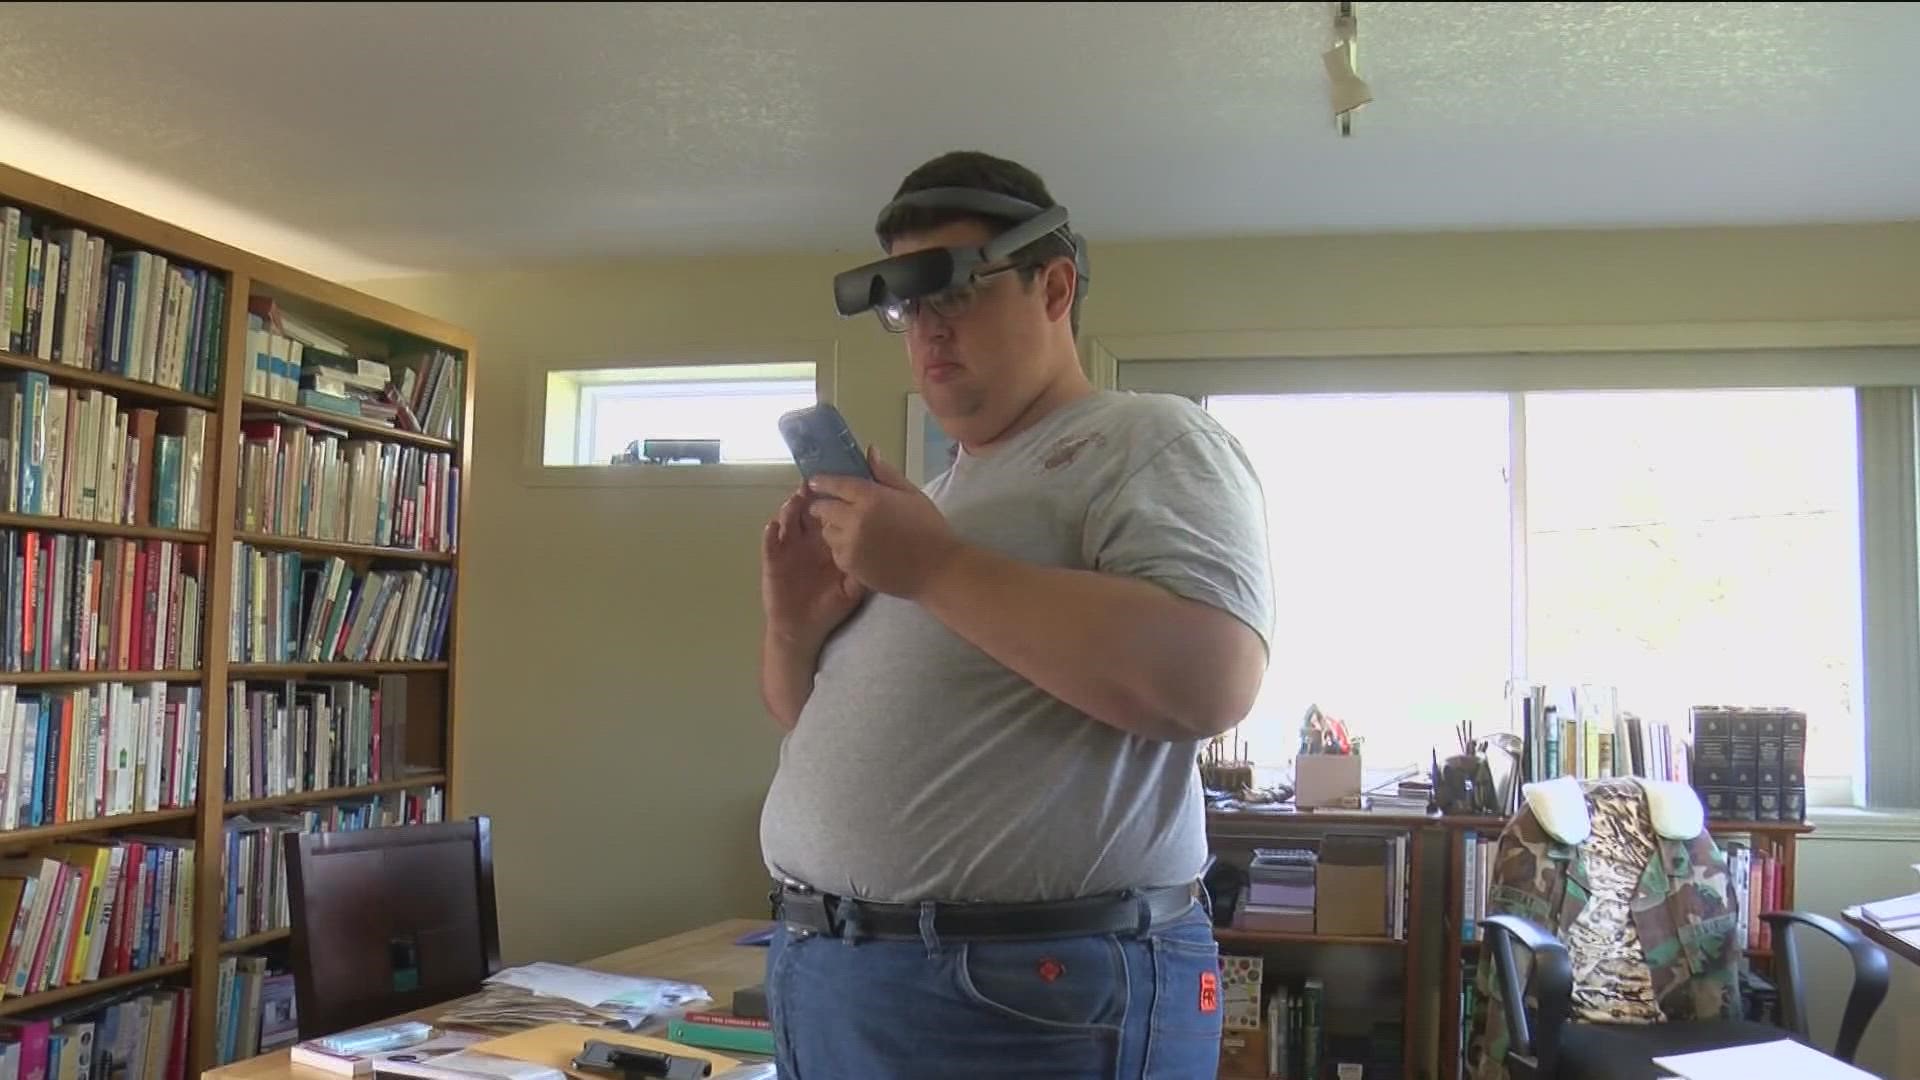 Madelyne Watkins sat down with Benjamin Murray, a legally blind man from Bryan, OH, to learn about a medical device that helps people see who are visually impaired.